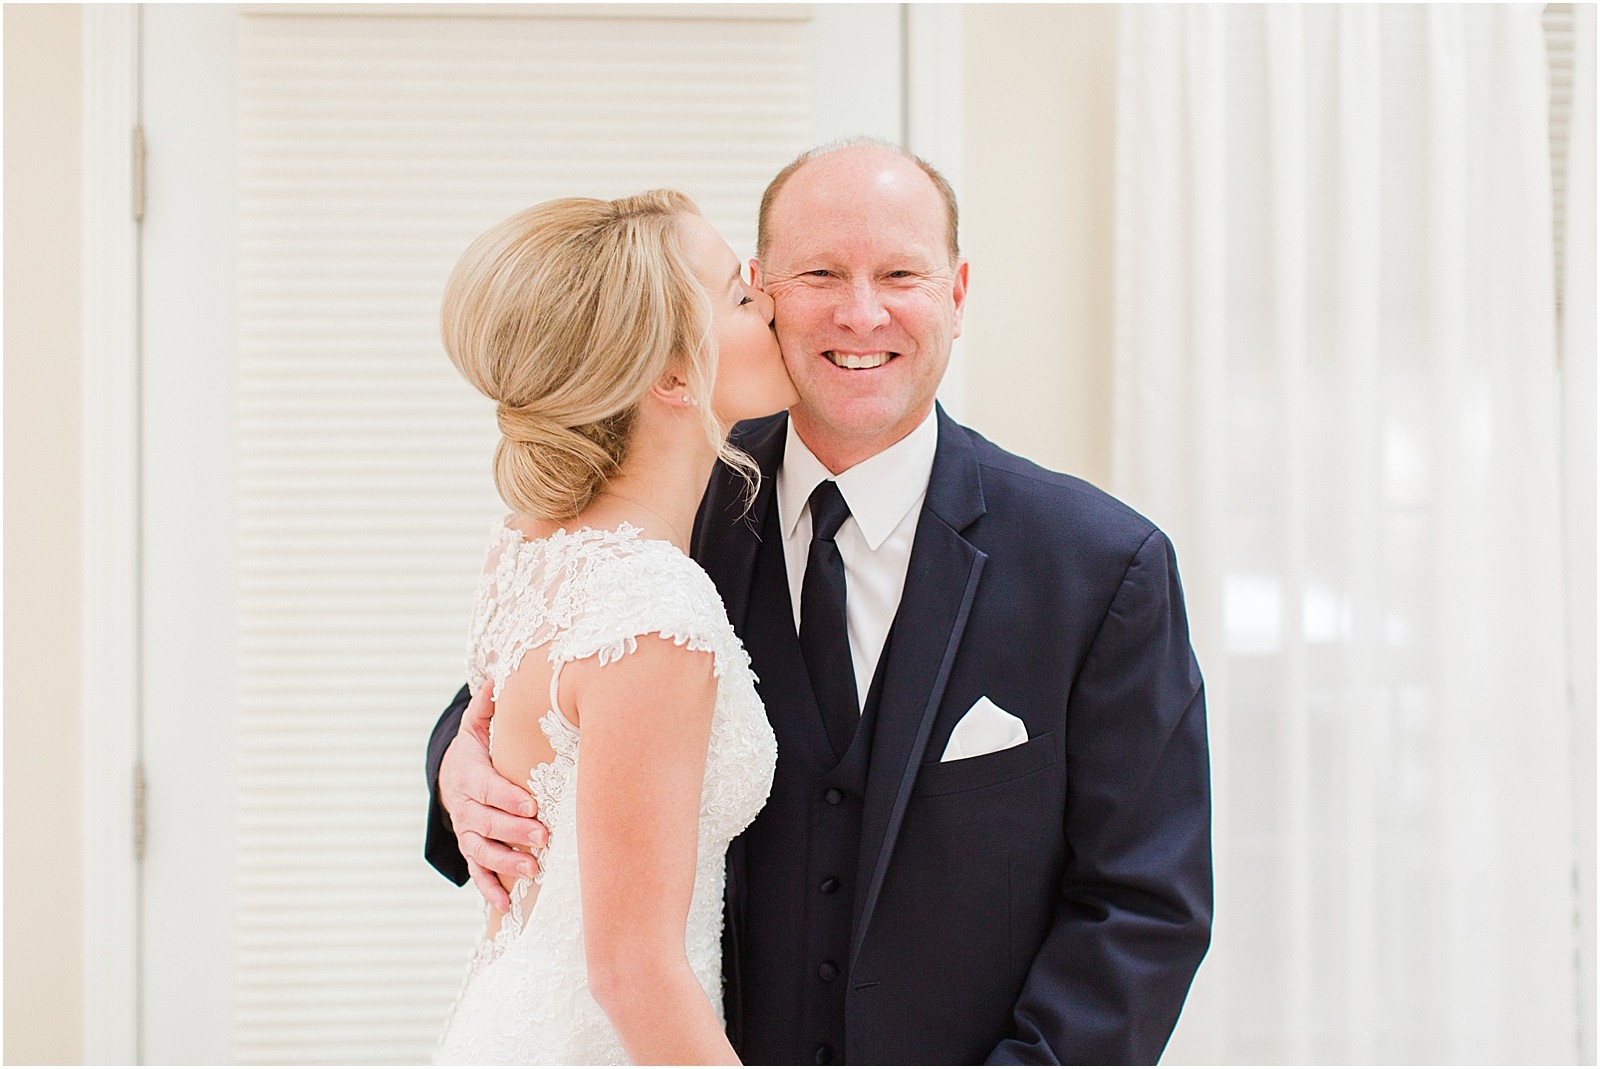 A Classic Winter Wedding in New Harmony | Rachel and Ryan | Bret and Brandie Photography 0040.jpg